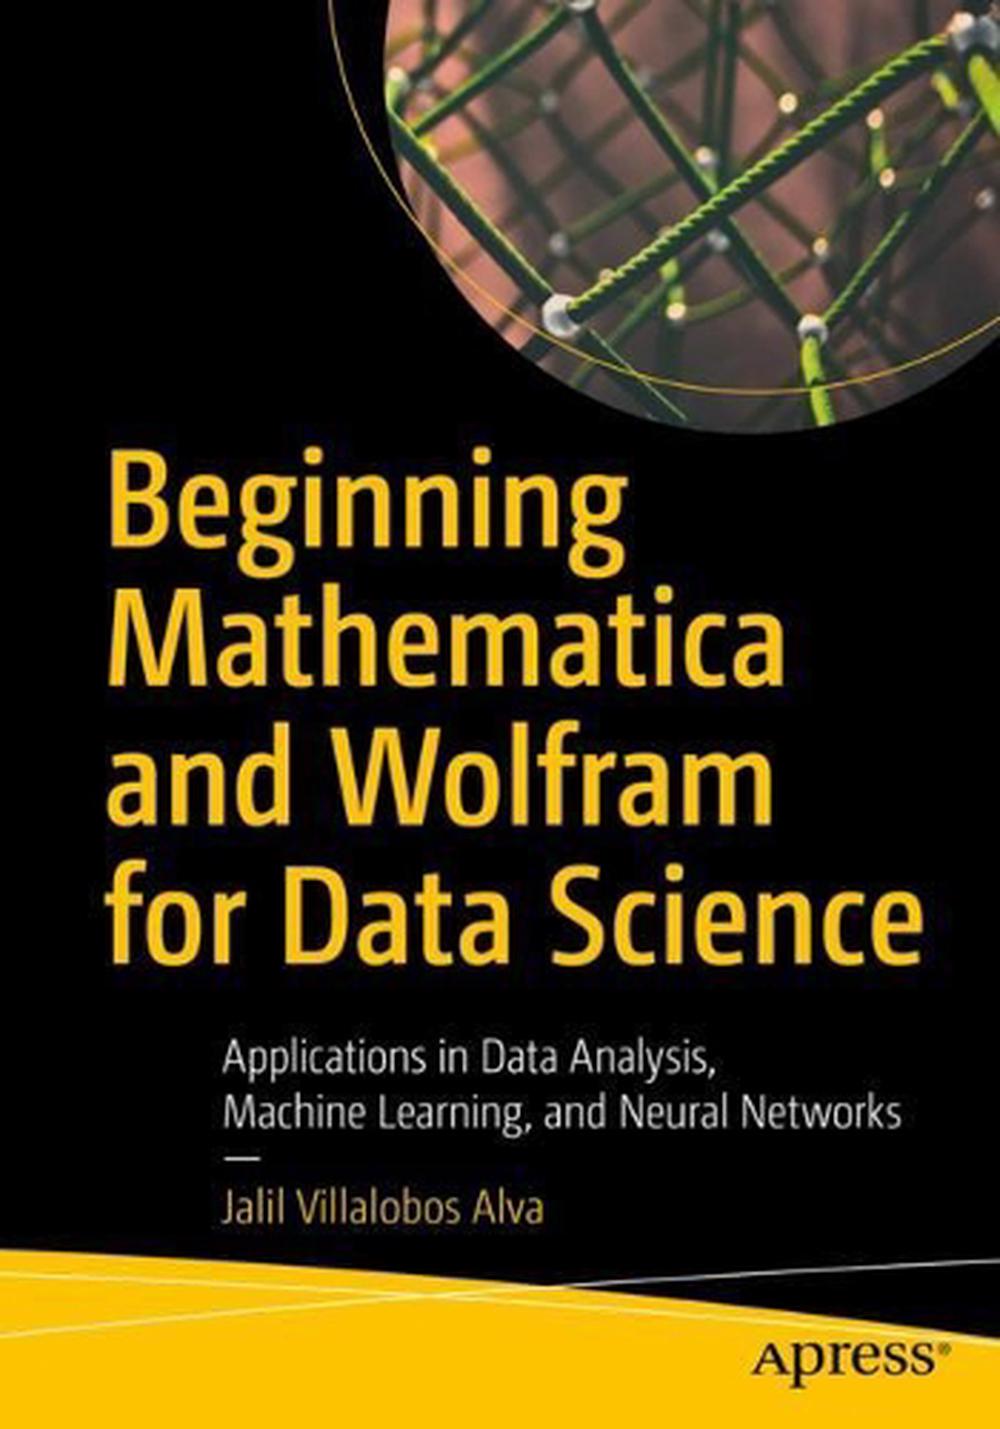 how to use wolfram mathematica for data analysis